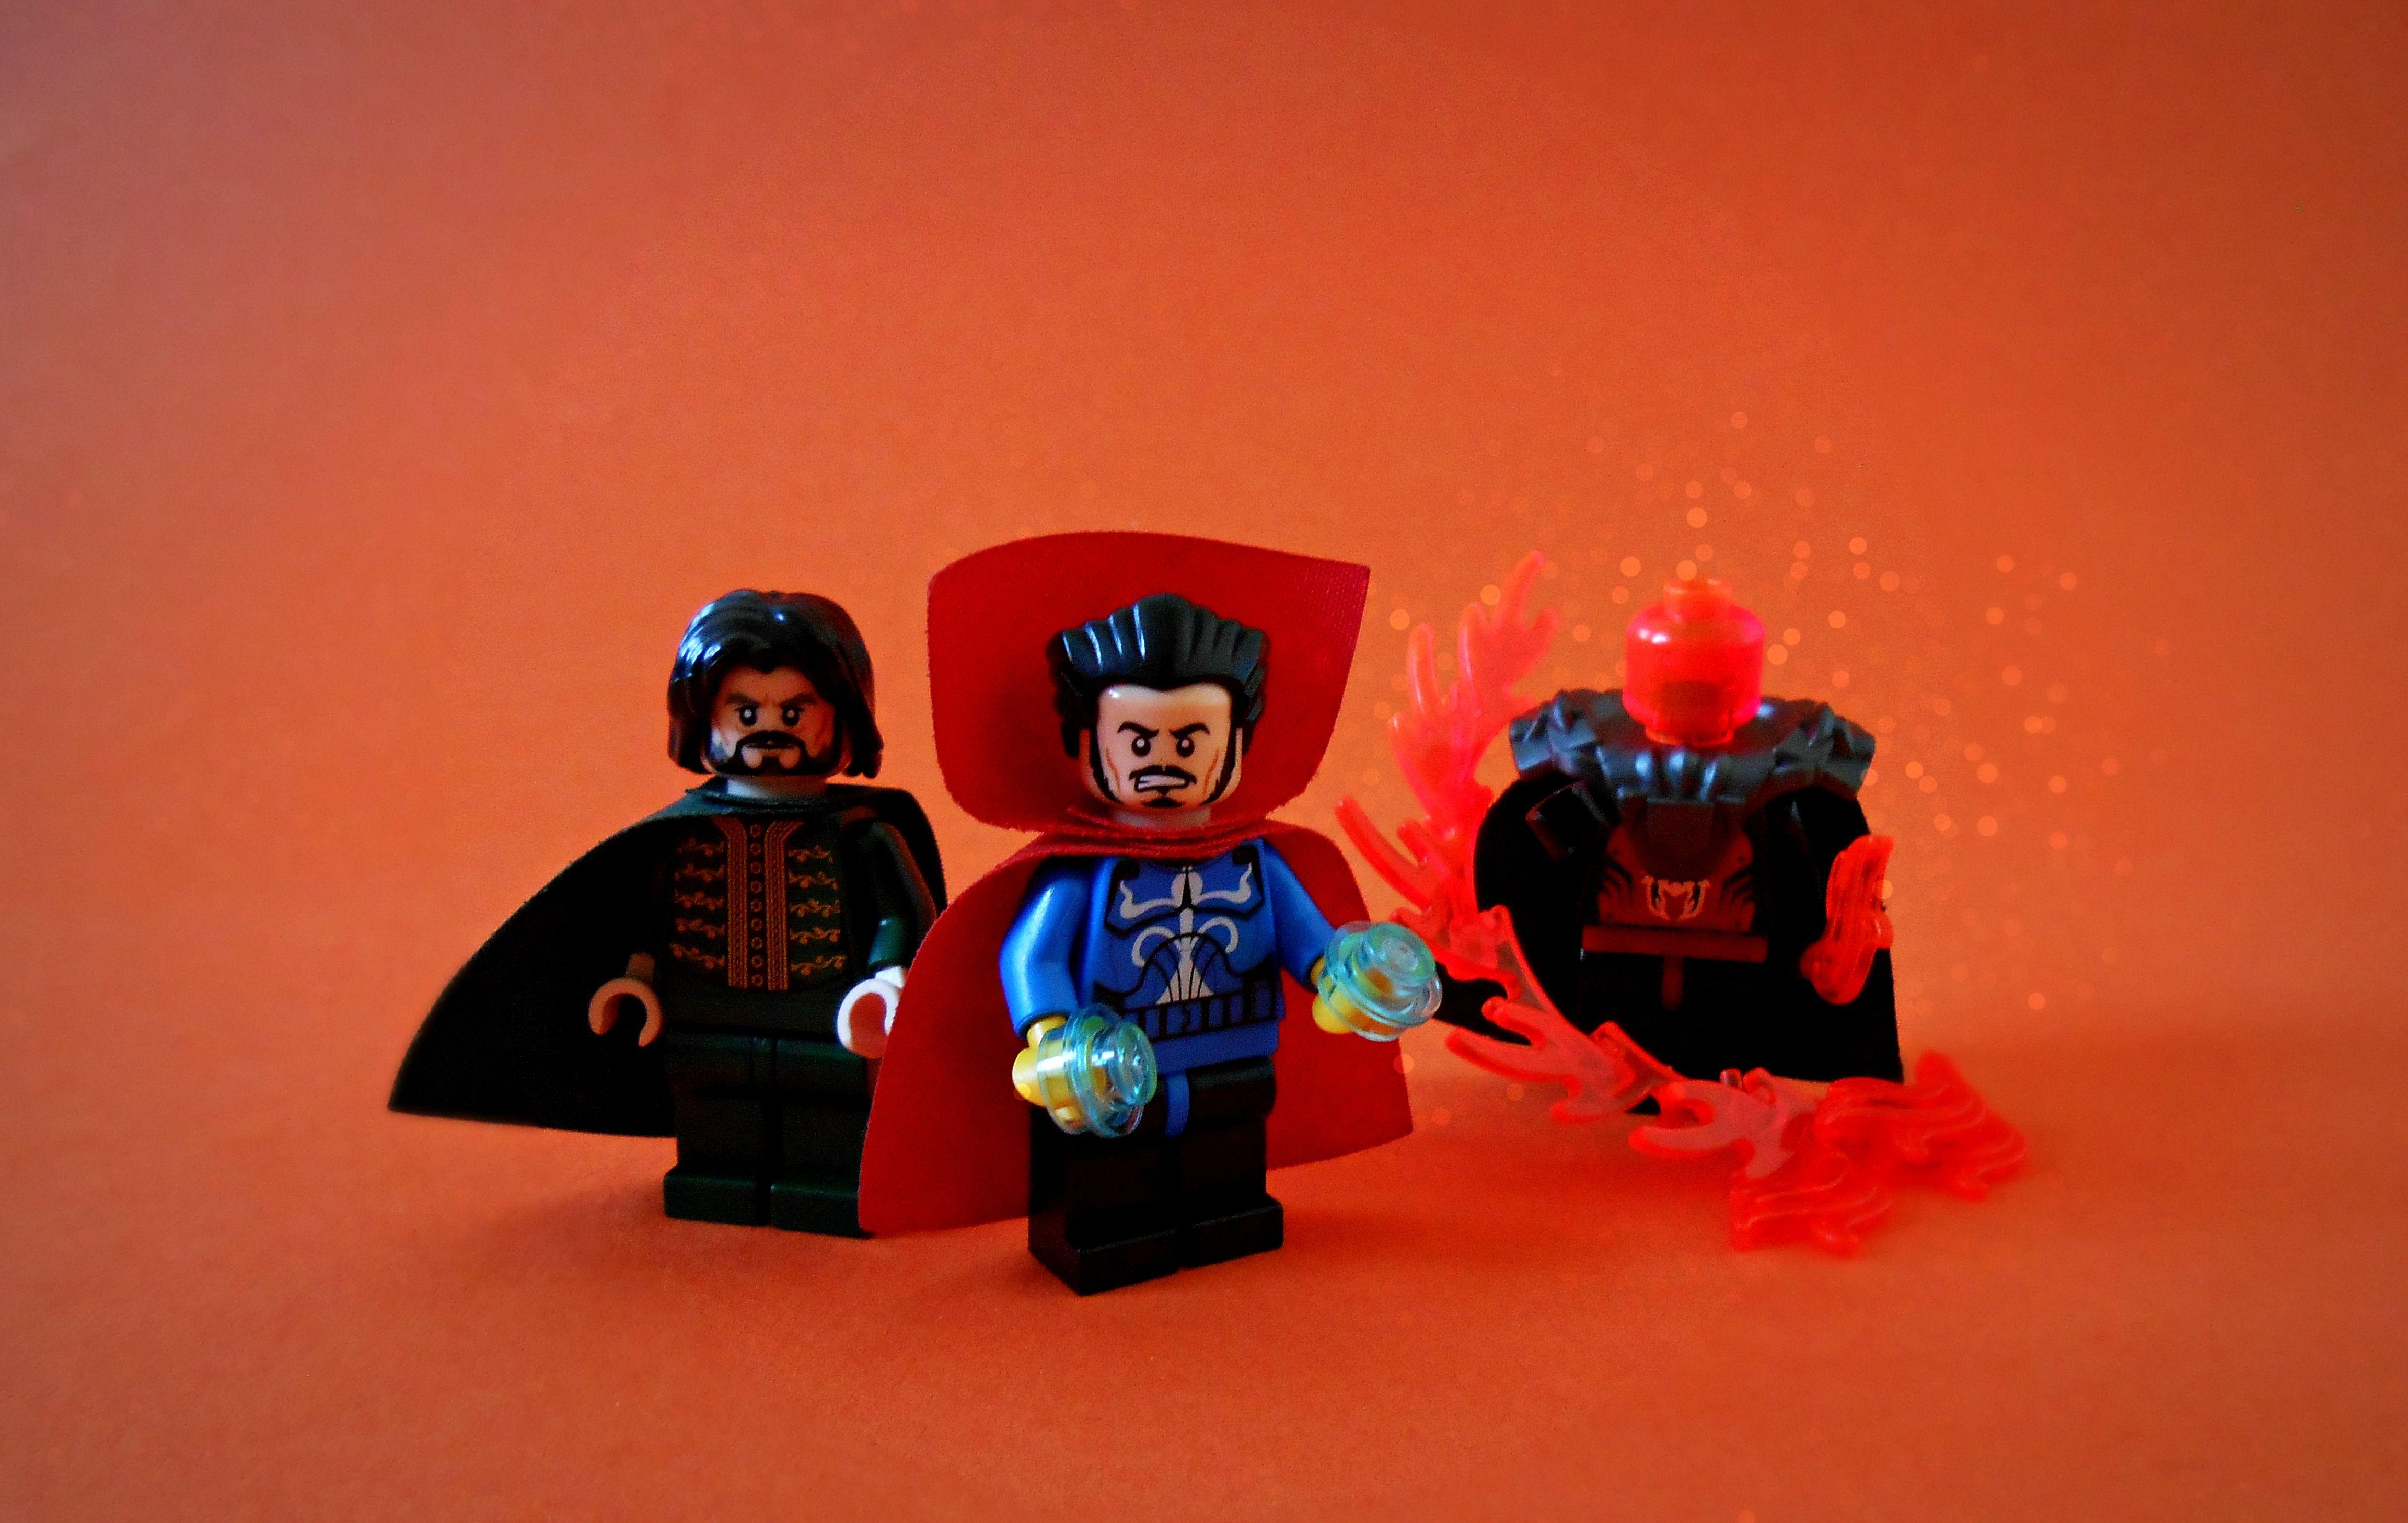 Wallpaper, space, red, LEGO, fire, magic, Devil, Toy, universe